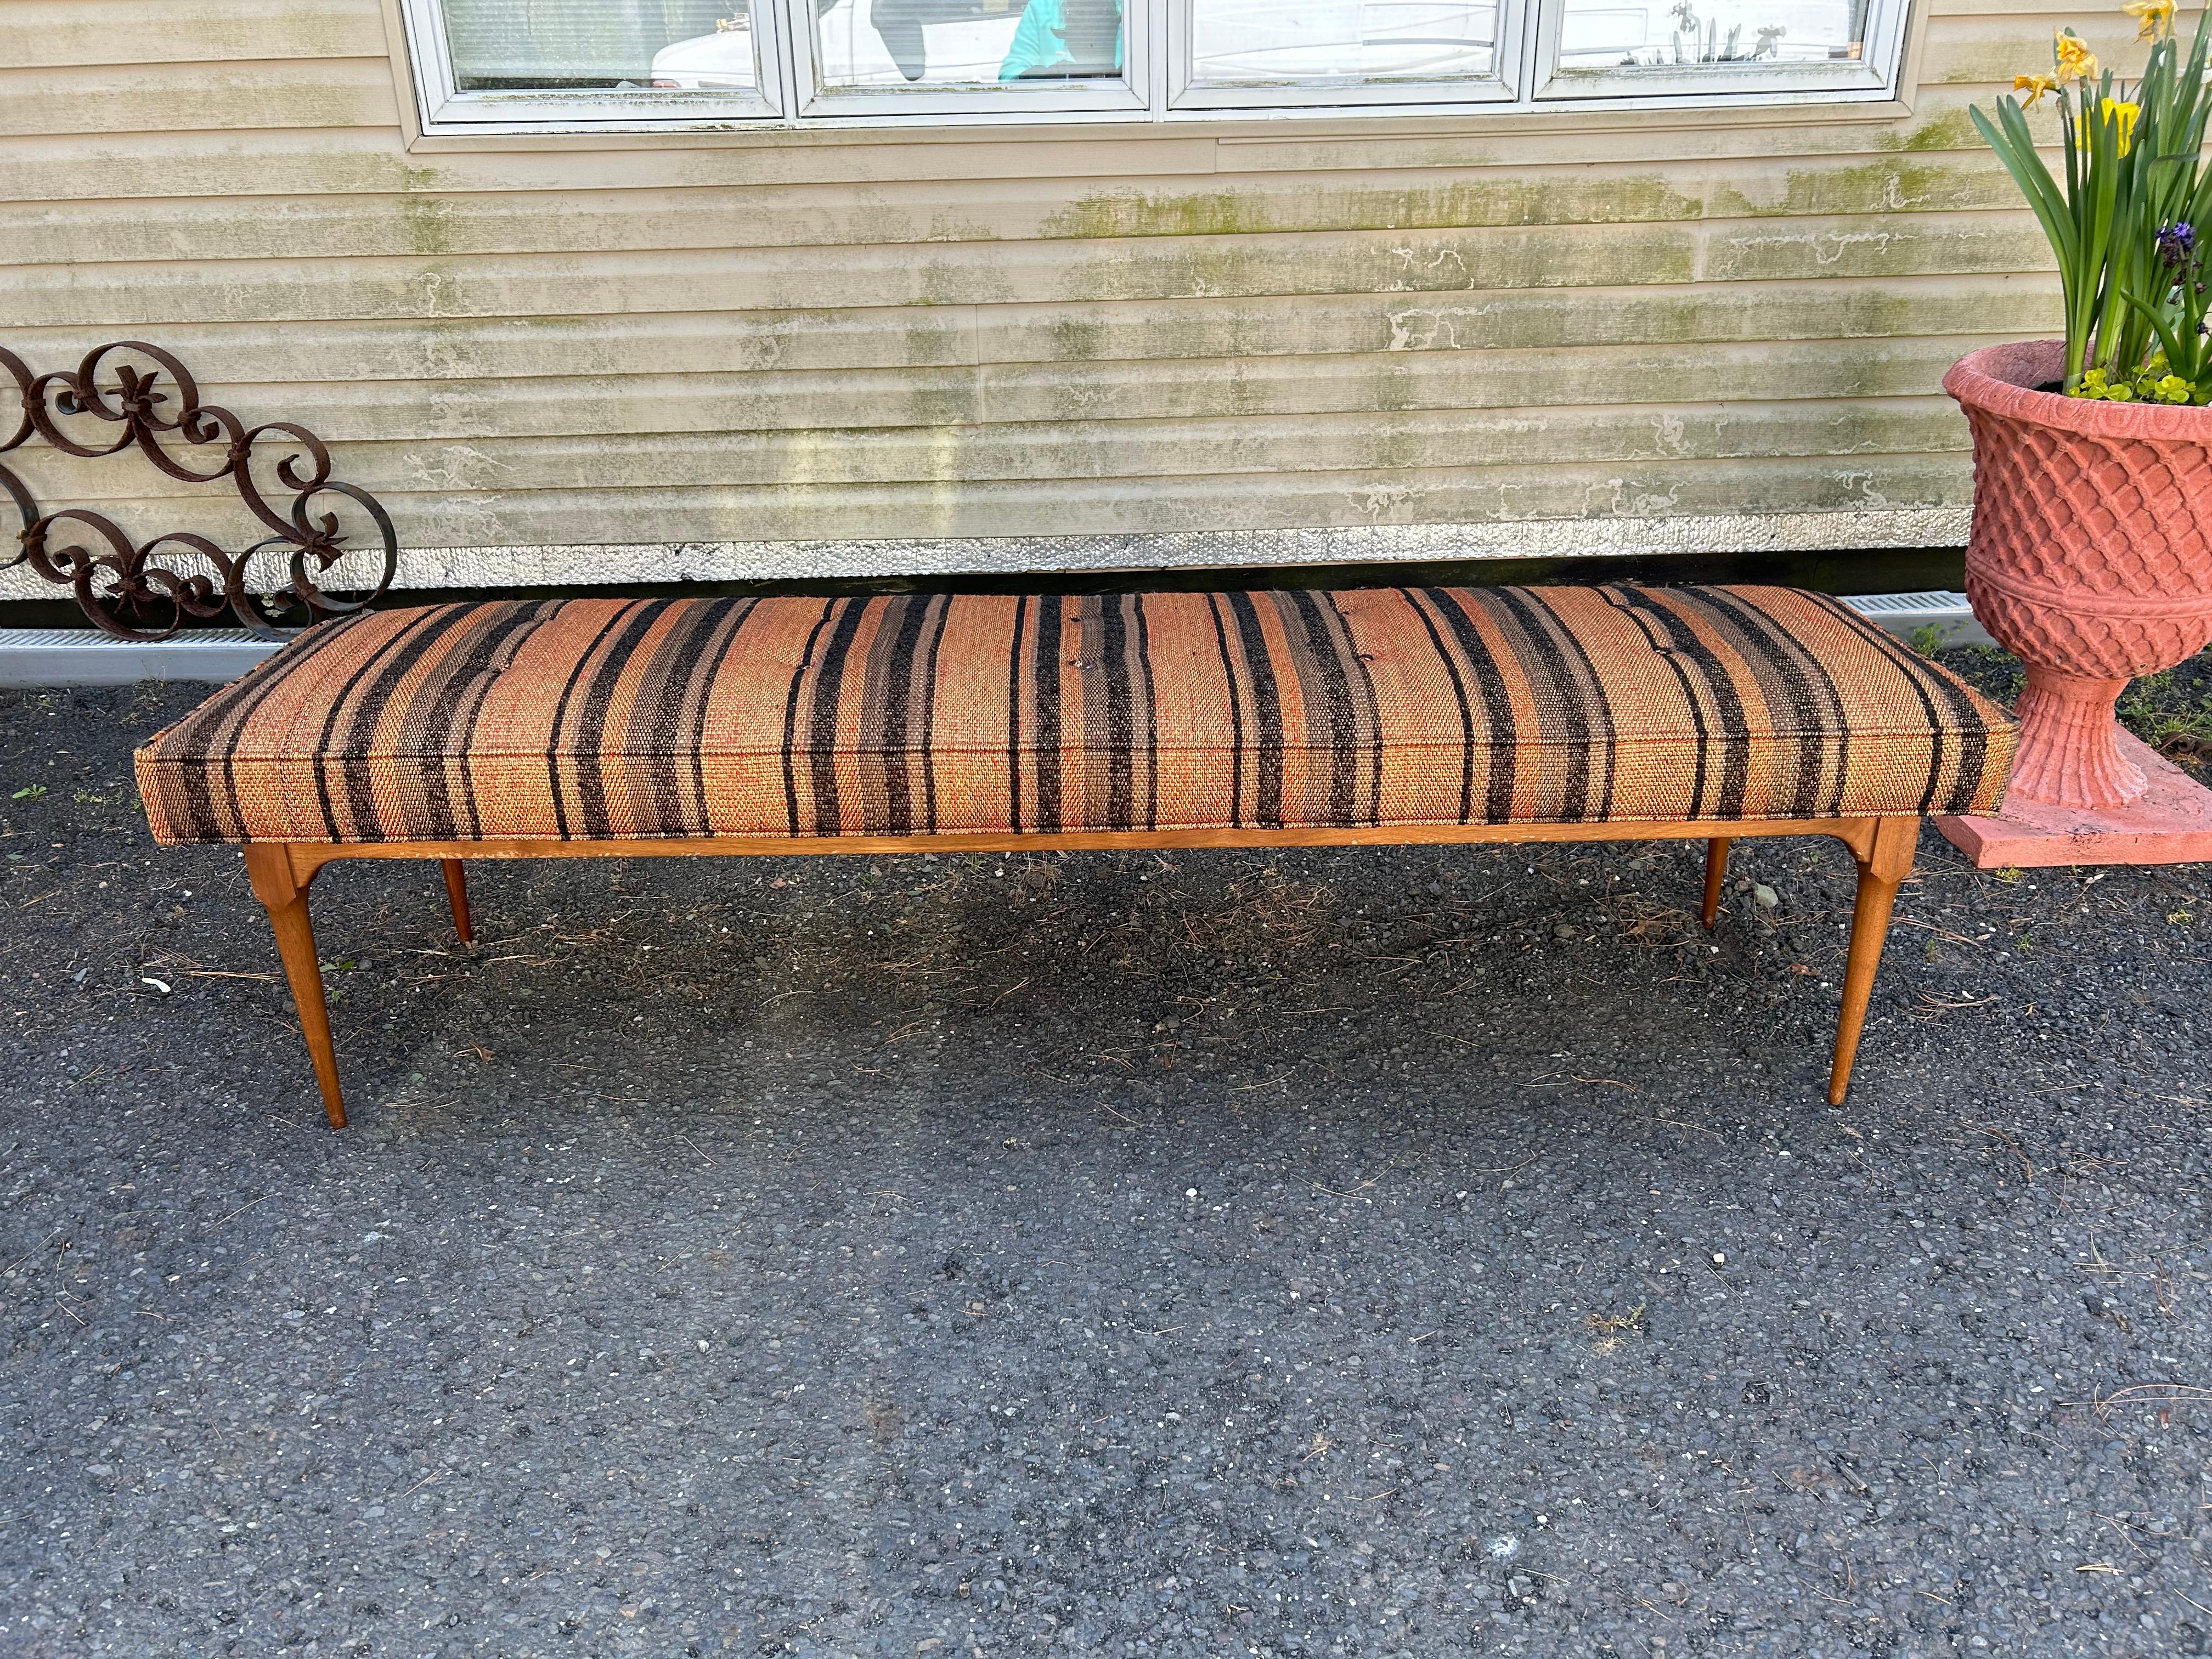 Handsome X-long Harvey Probber style walnut bench.  The original striped woven fabric still looks quite nice with only light signs of use.  This piece measures 18.5